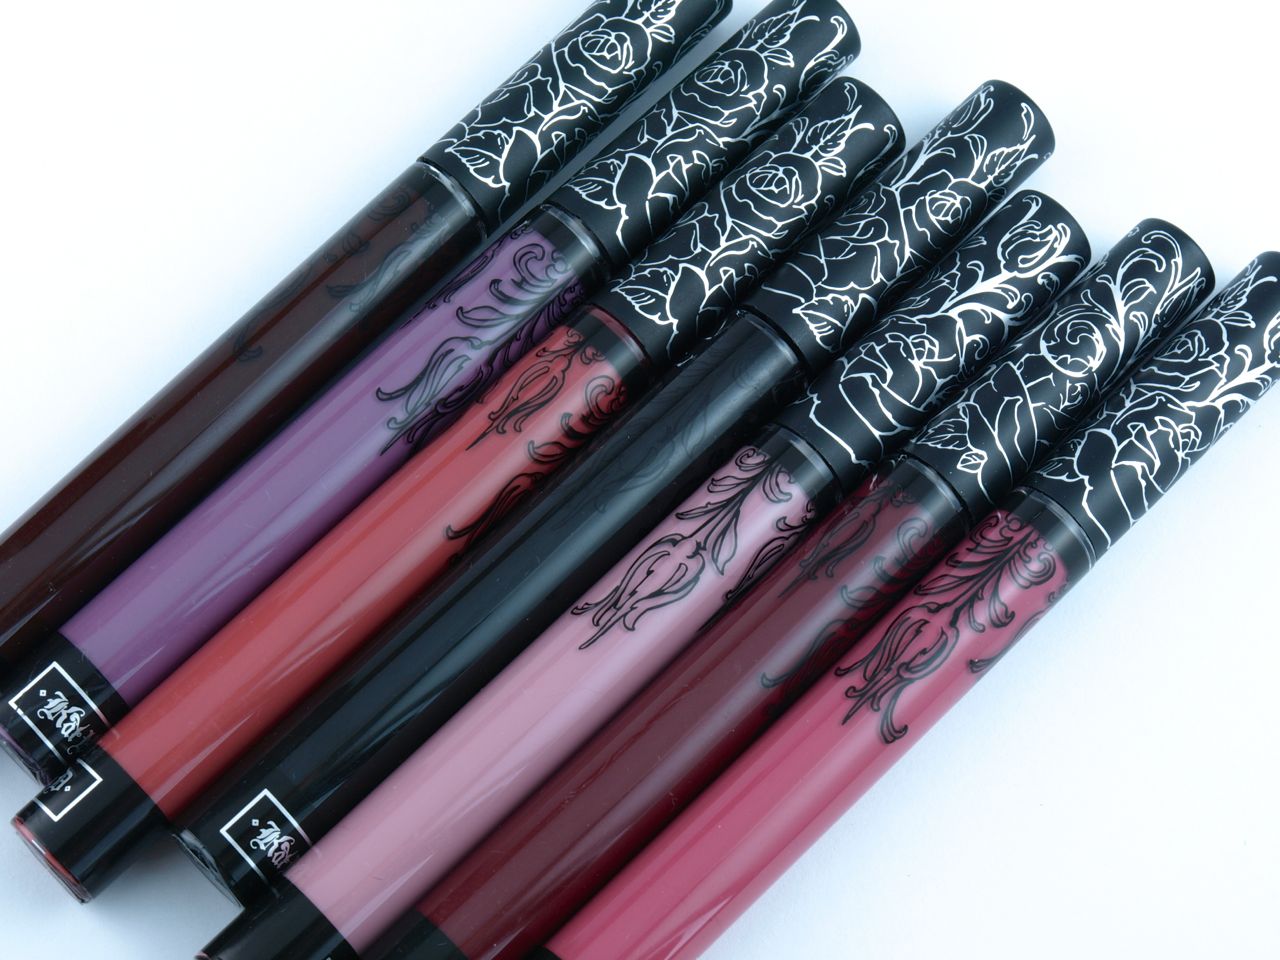 NEW 2015 Von D Everlasting Liquid Lipsticks: Review and | Happy Sloths: Beauty, Makeup, and Skincare Blog with Reviews and Swatches